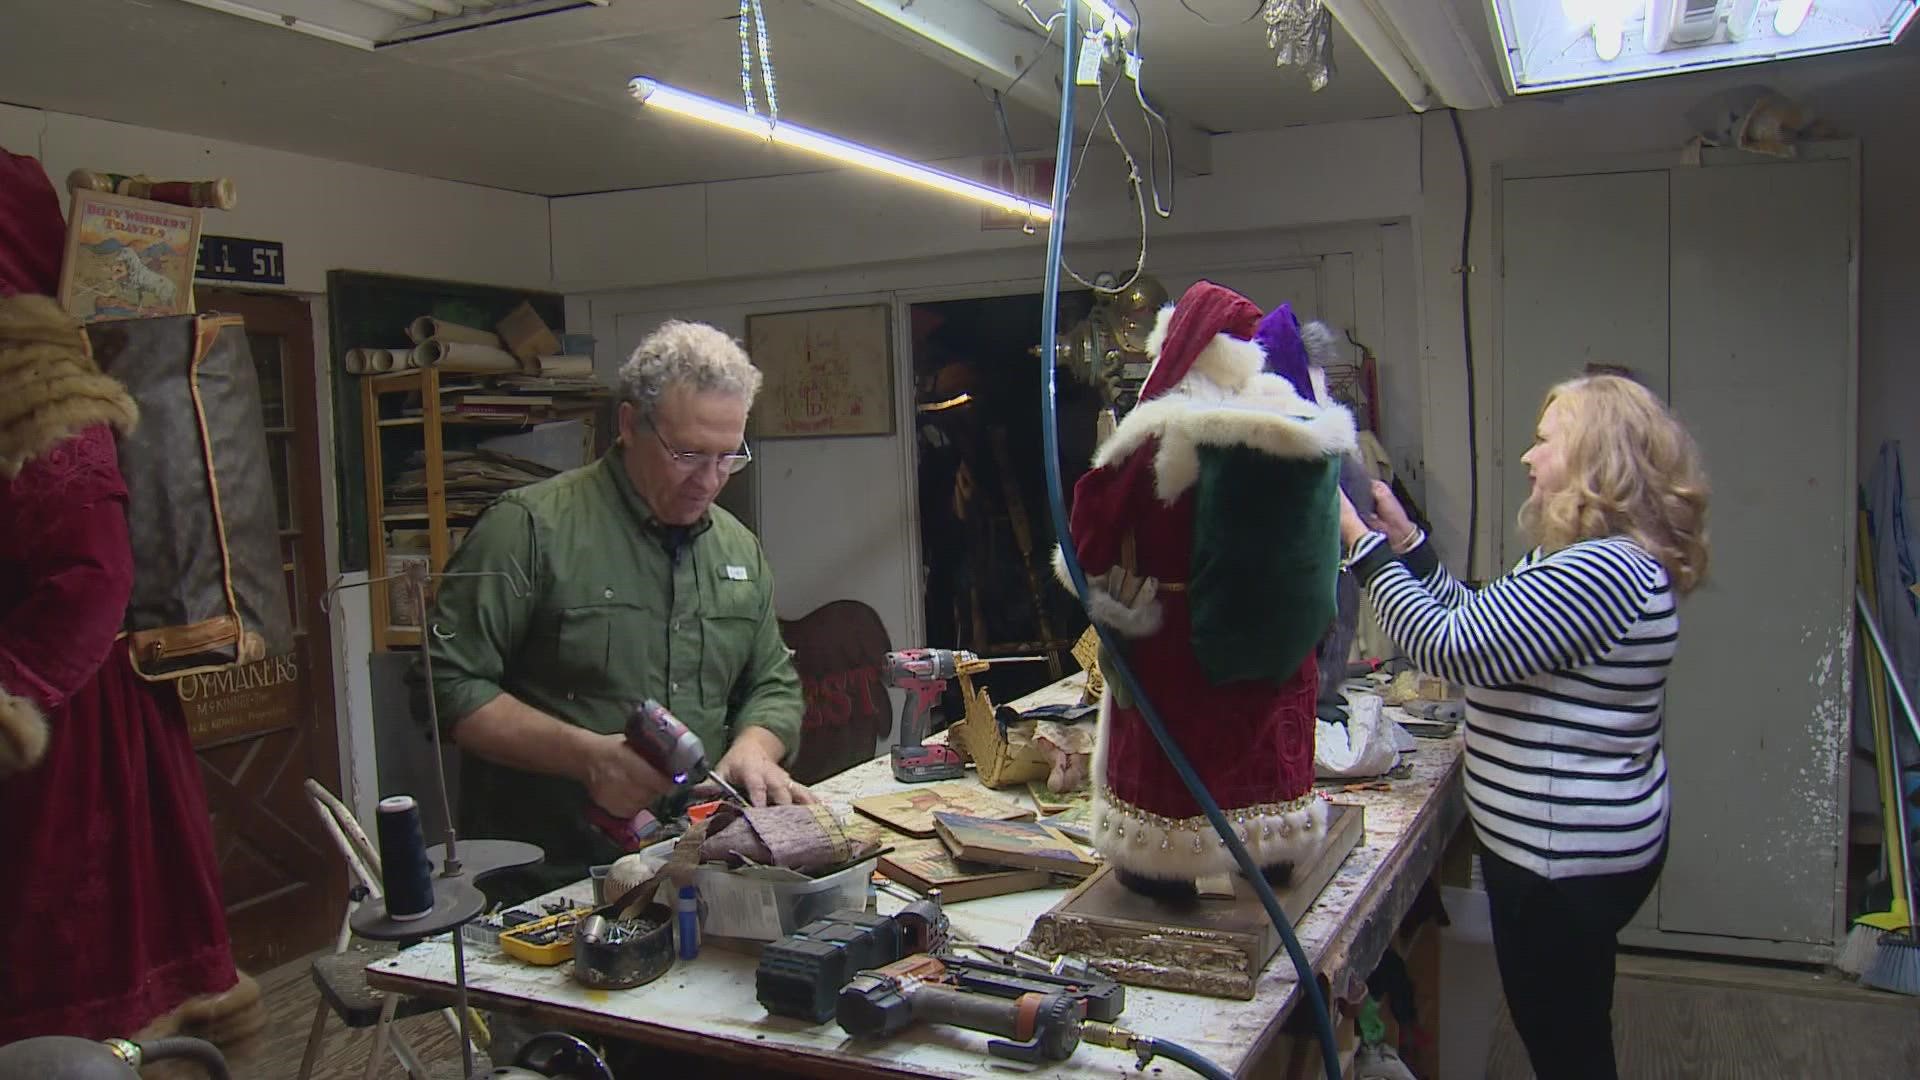 Married 37 years -- Brian and Cynthia Kidwell have been working side by side to make handcrafted heirloom Santas.